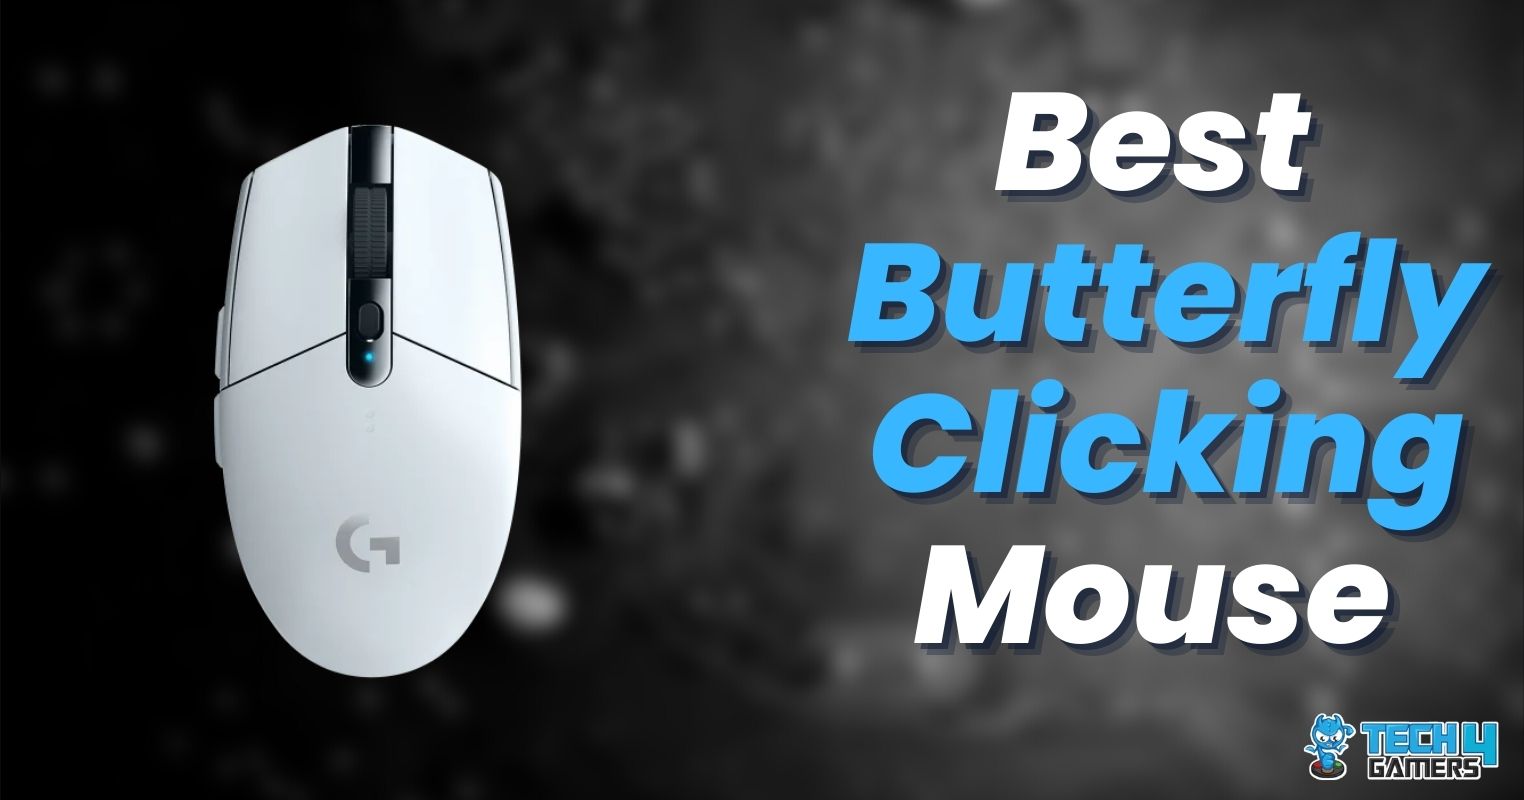 Butterfly Click Test Beginner's Guide: by Butterfly